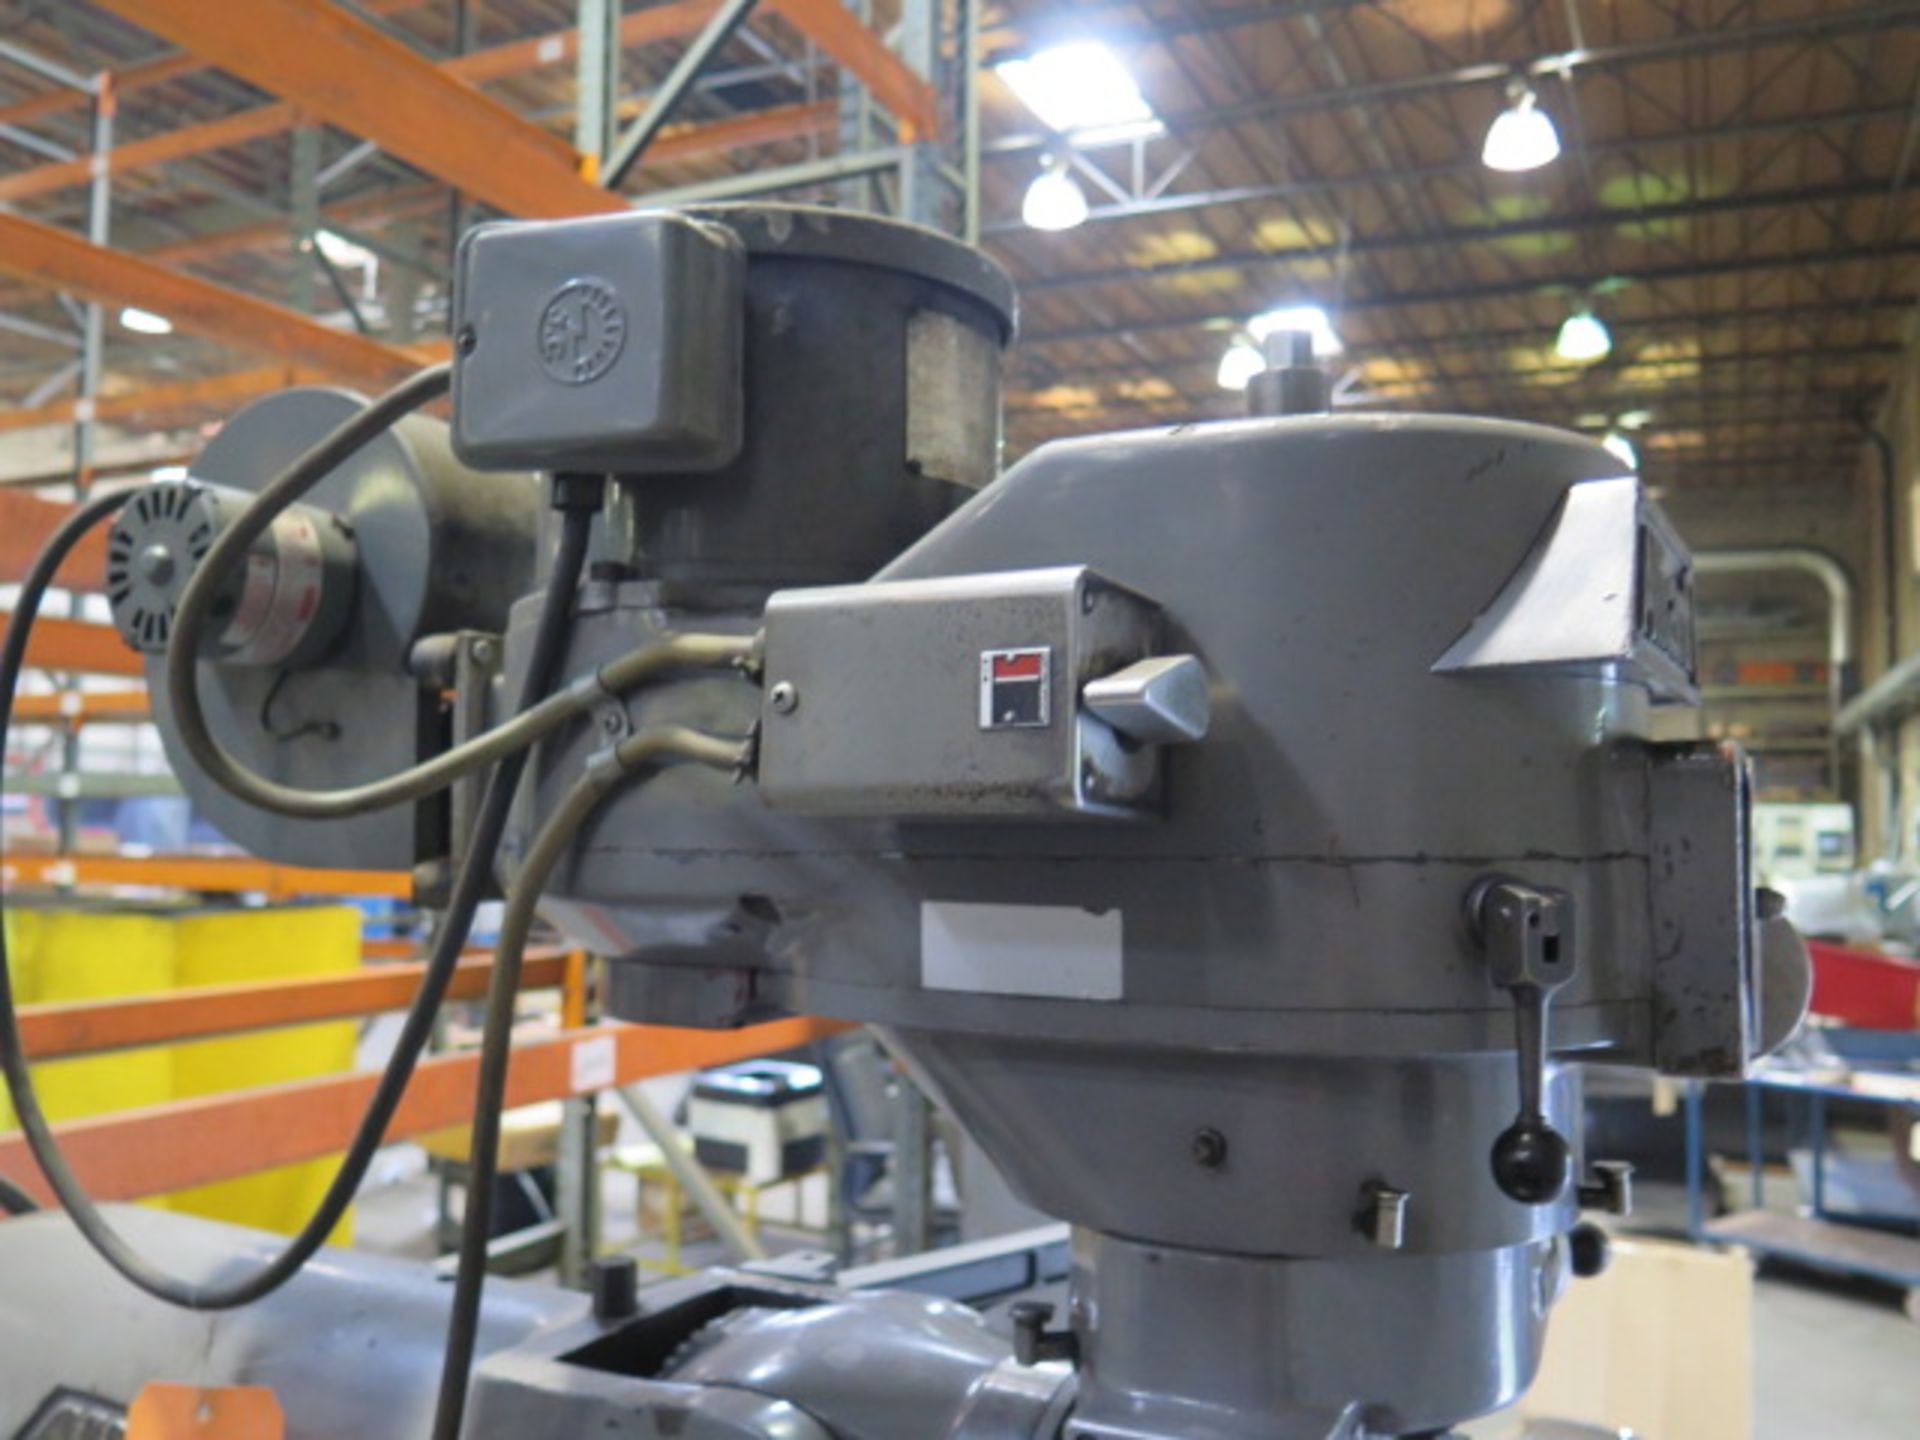 Alliant Vertical Mill s/n 61210241 w/ DRO, 2Hp Motor,60-4500 Dial Change RPM, Chrome ways,SOLD AS IS - Image 8 of 16